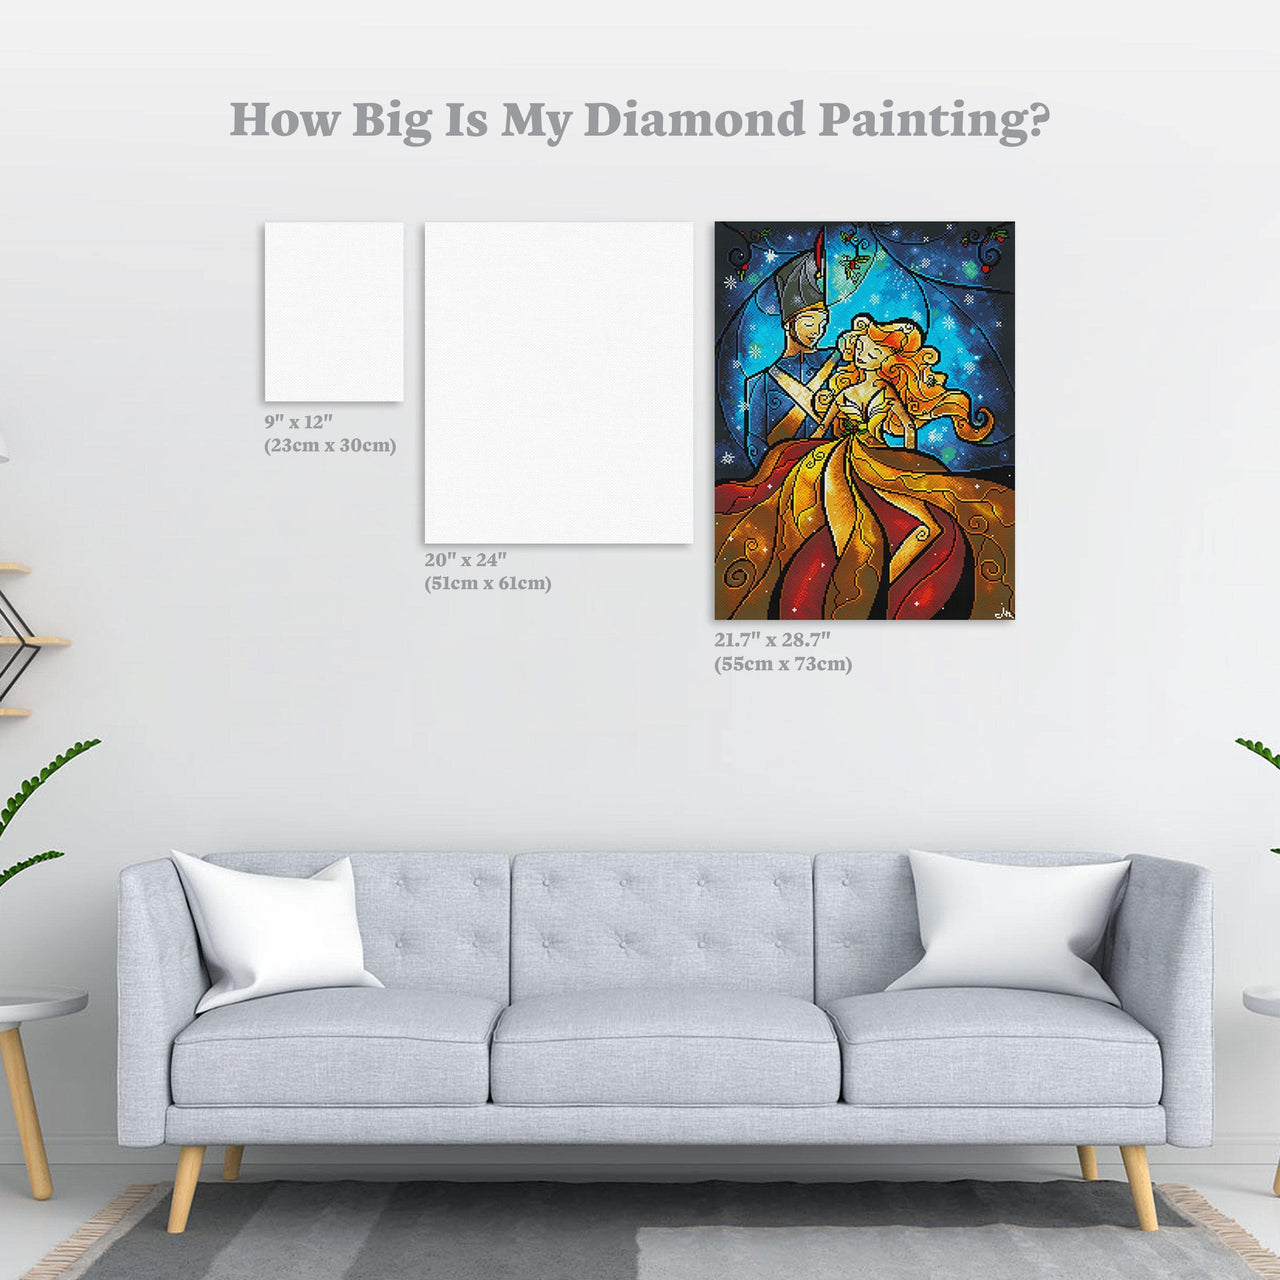 Diamond Painting The Little Tin Soldier 21.7" x 28.7" (55cm x 73cm) / Round With 43 Colors including 1 AB / 50,052